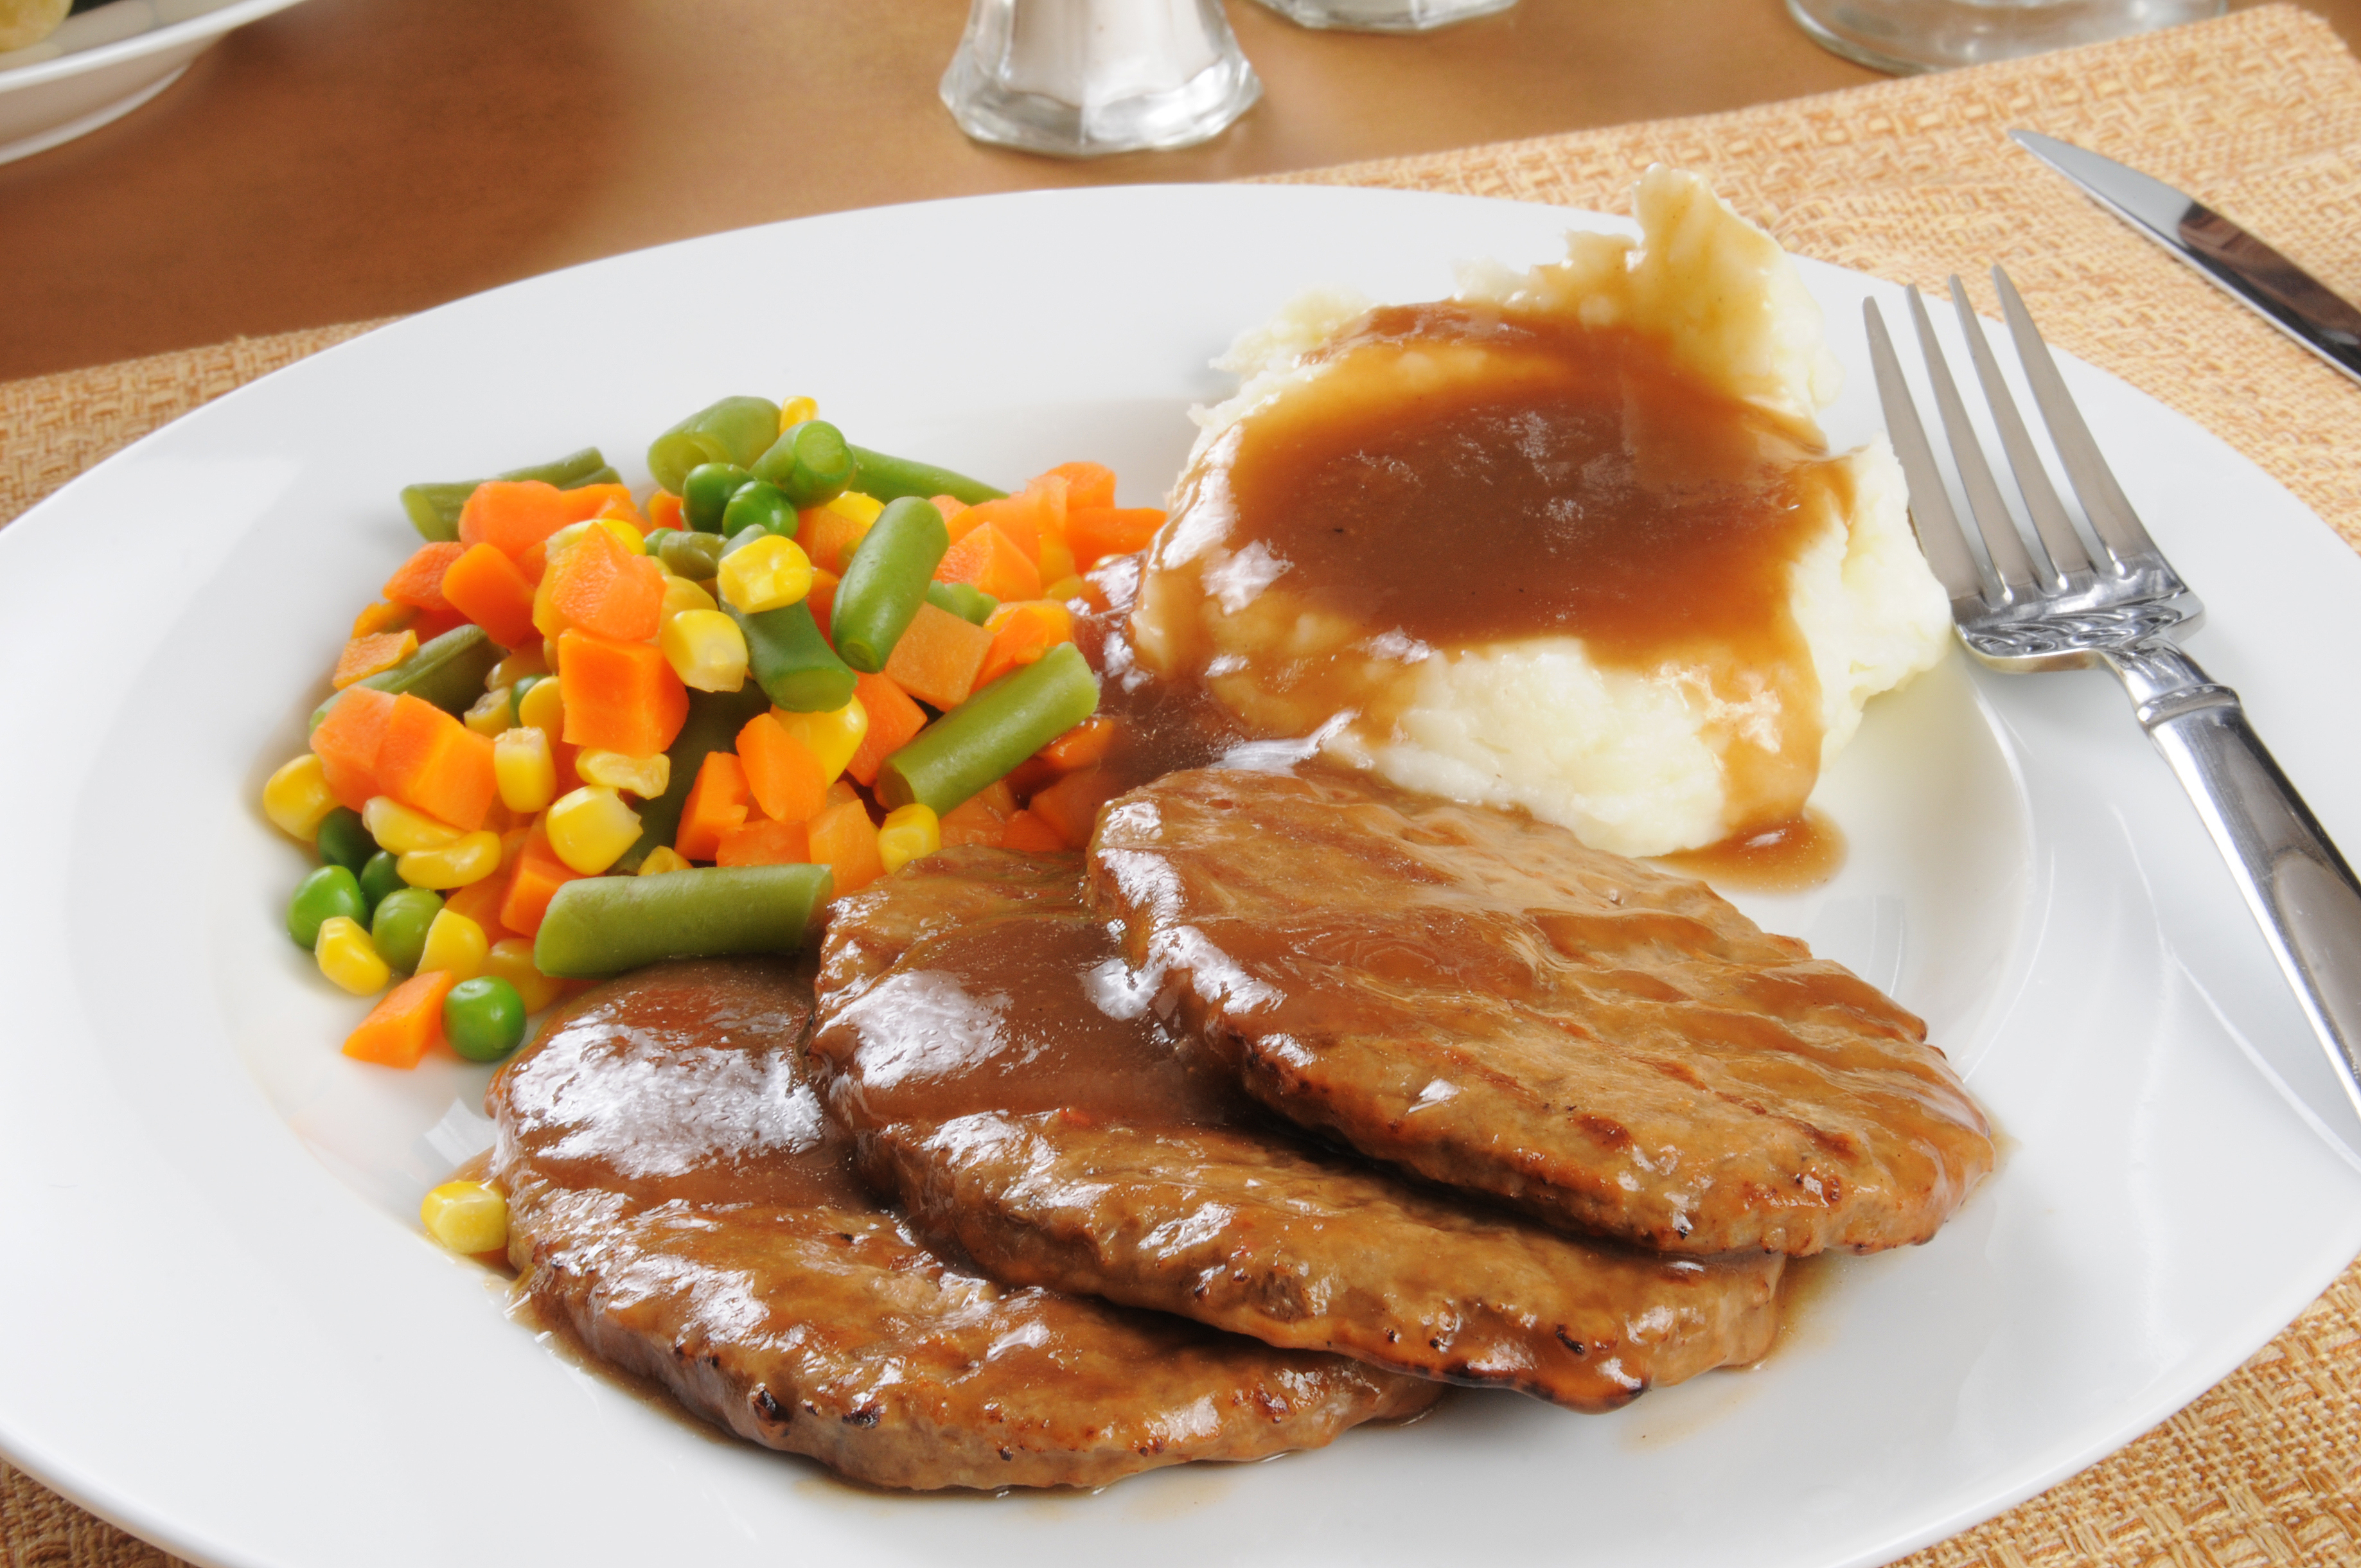 A plate of meatloaf topped with gravy, served with mashed potatoes and gravy, and a side of mixed vegetables (corn, peas, carrots, and green beans)